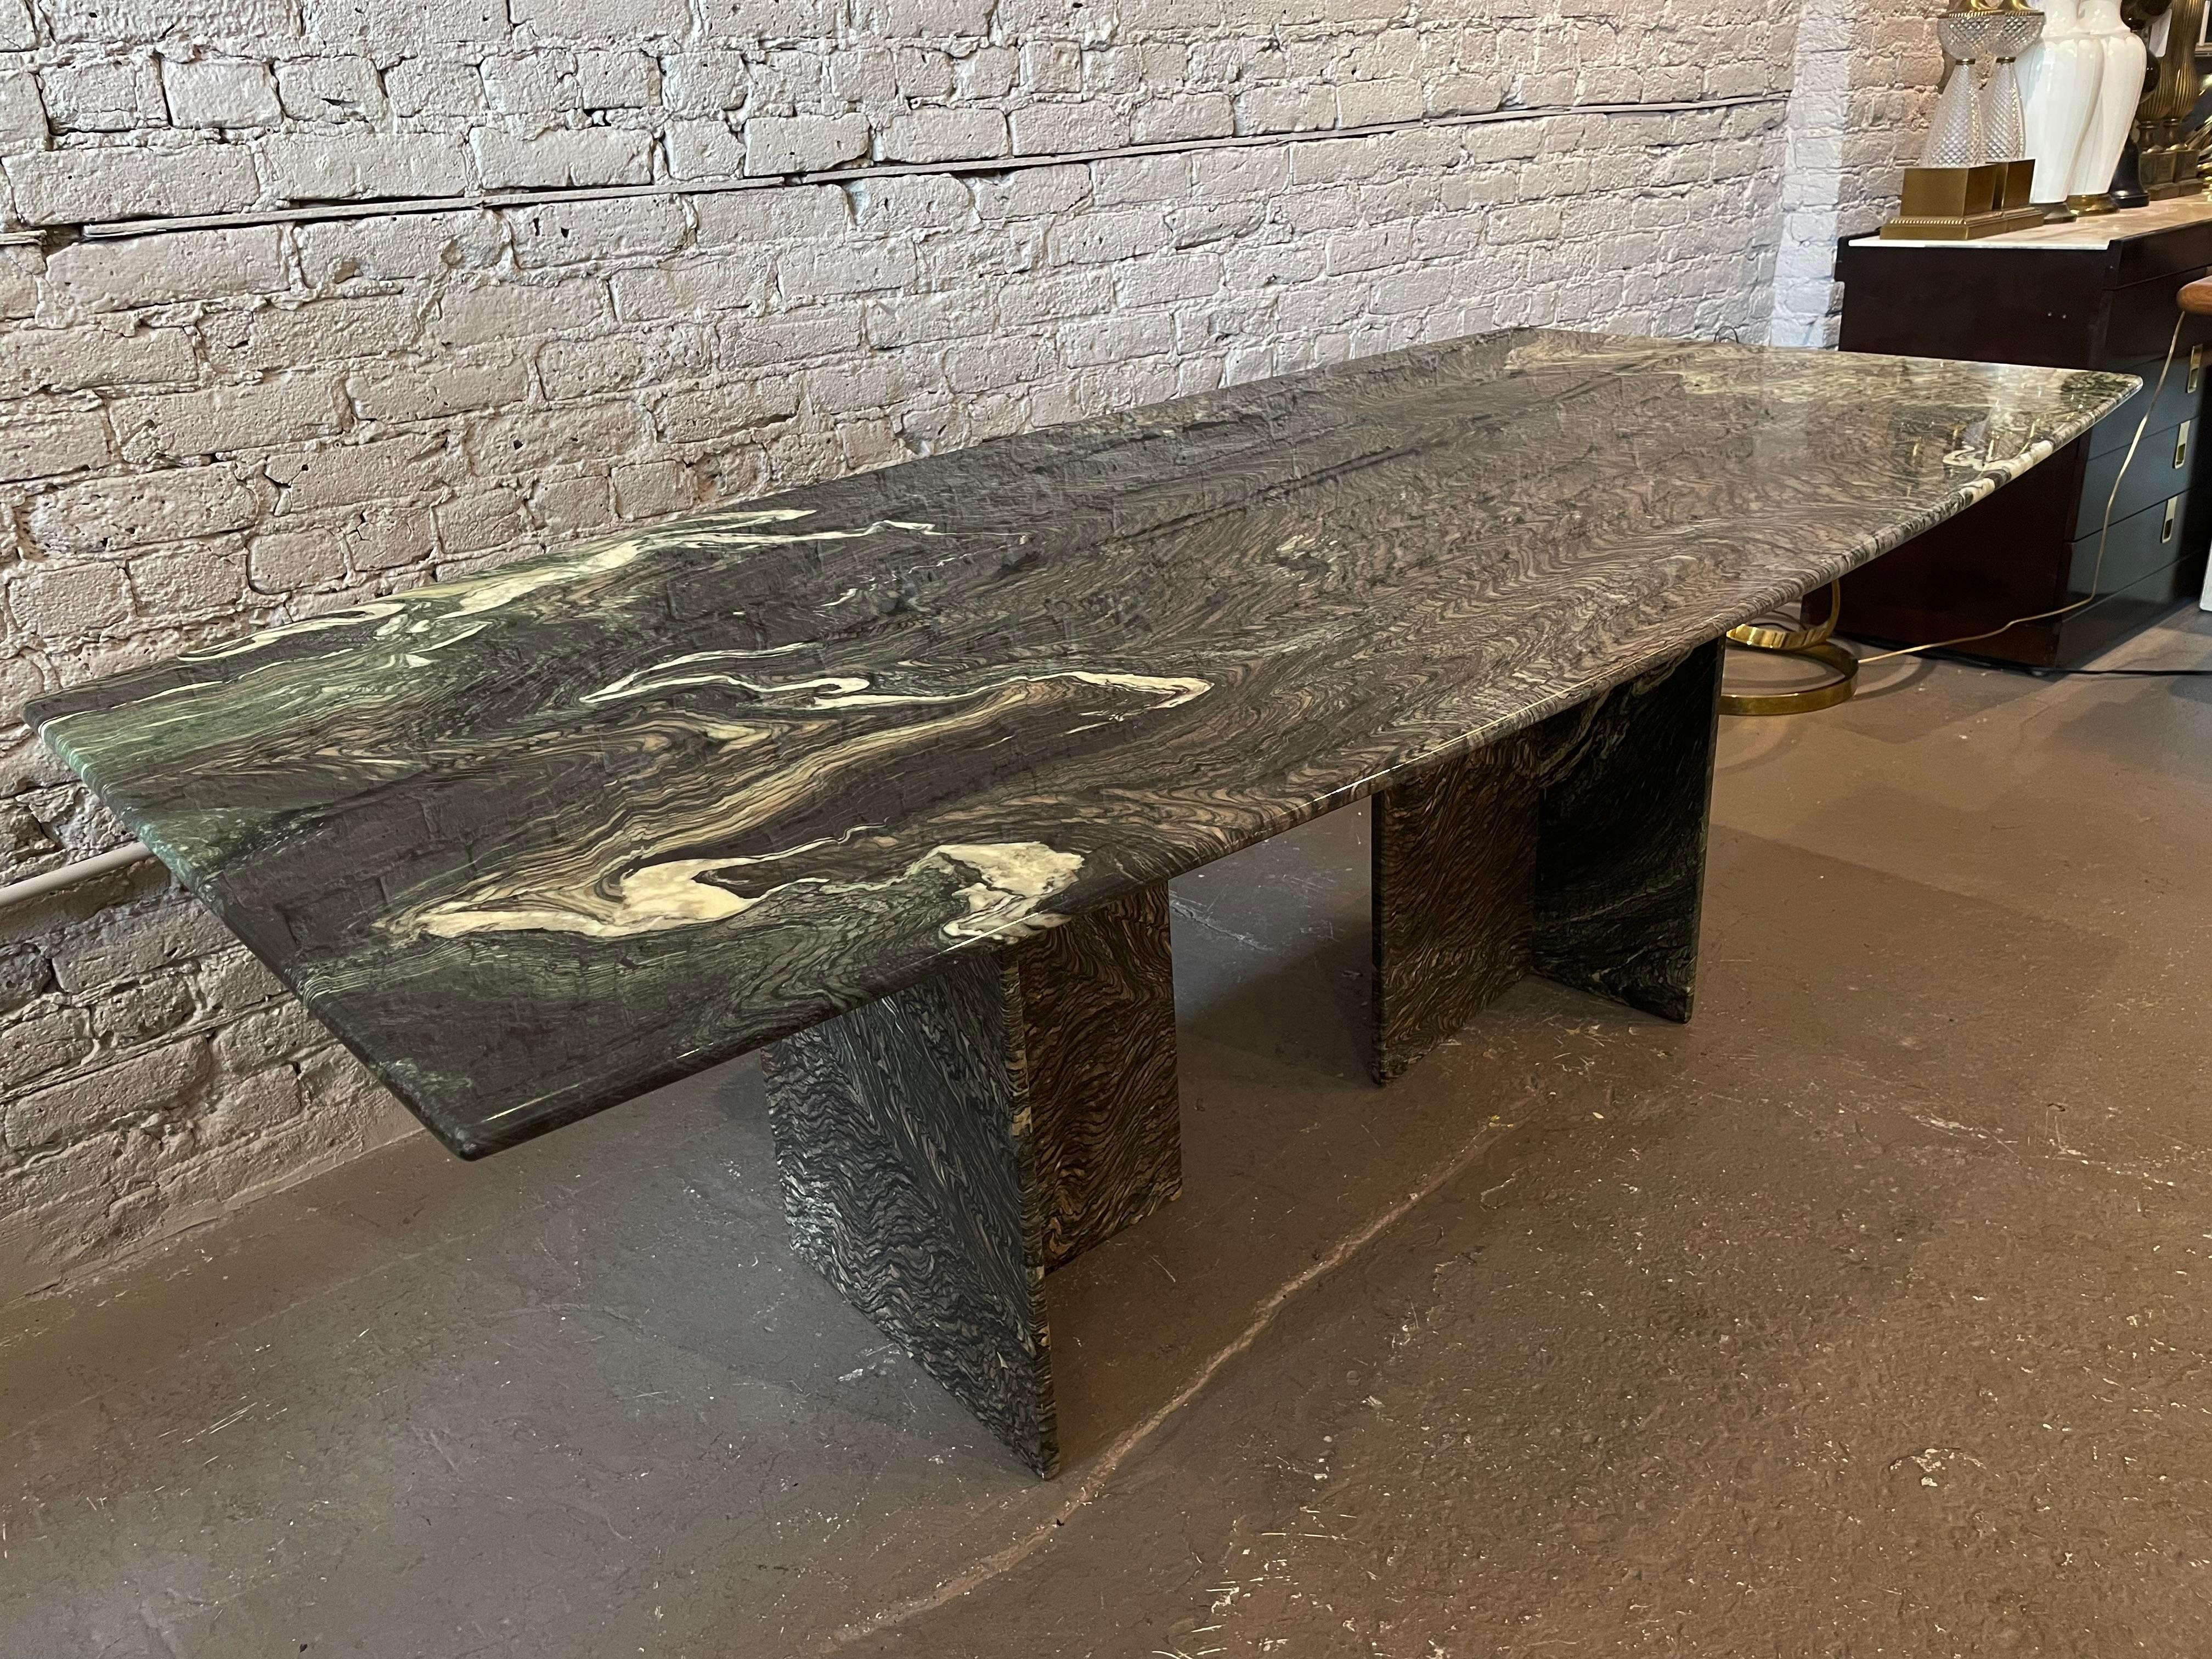 Absolutely breathtaking dining table. Dramatic elegance. The colors are: black, ivory, blush, with a bit of green.
The two pedestal bases separate from the top.
One corner (photographed) looks like it was repaired but it’s the least significant